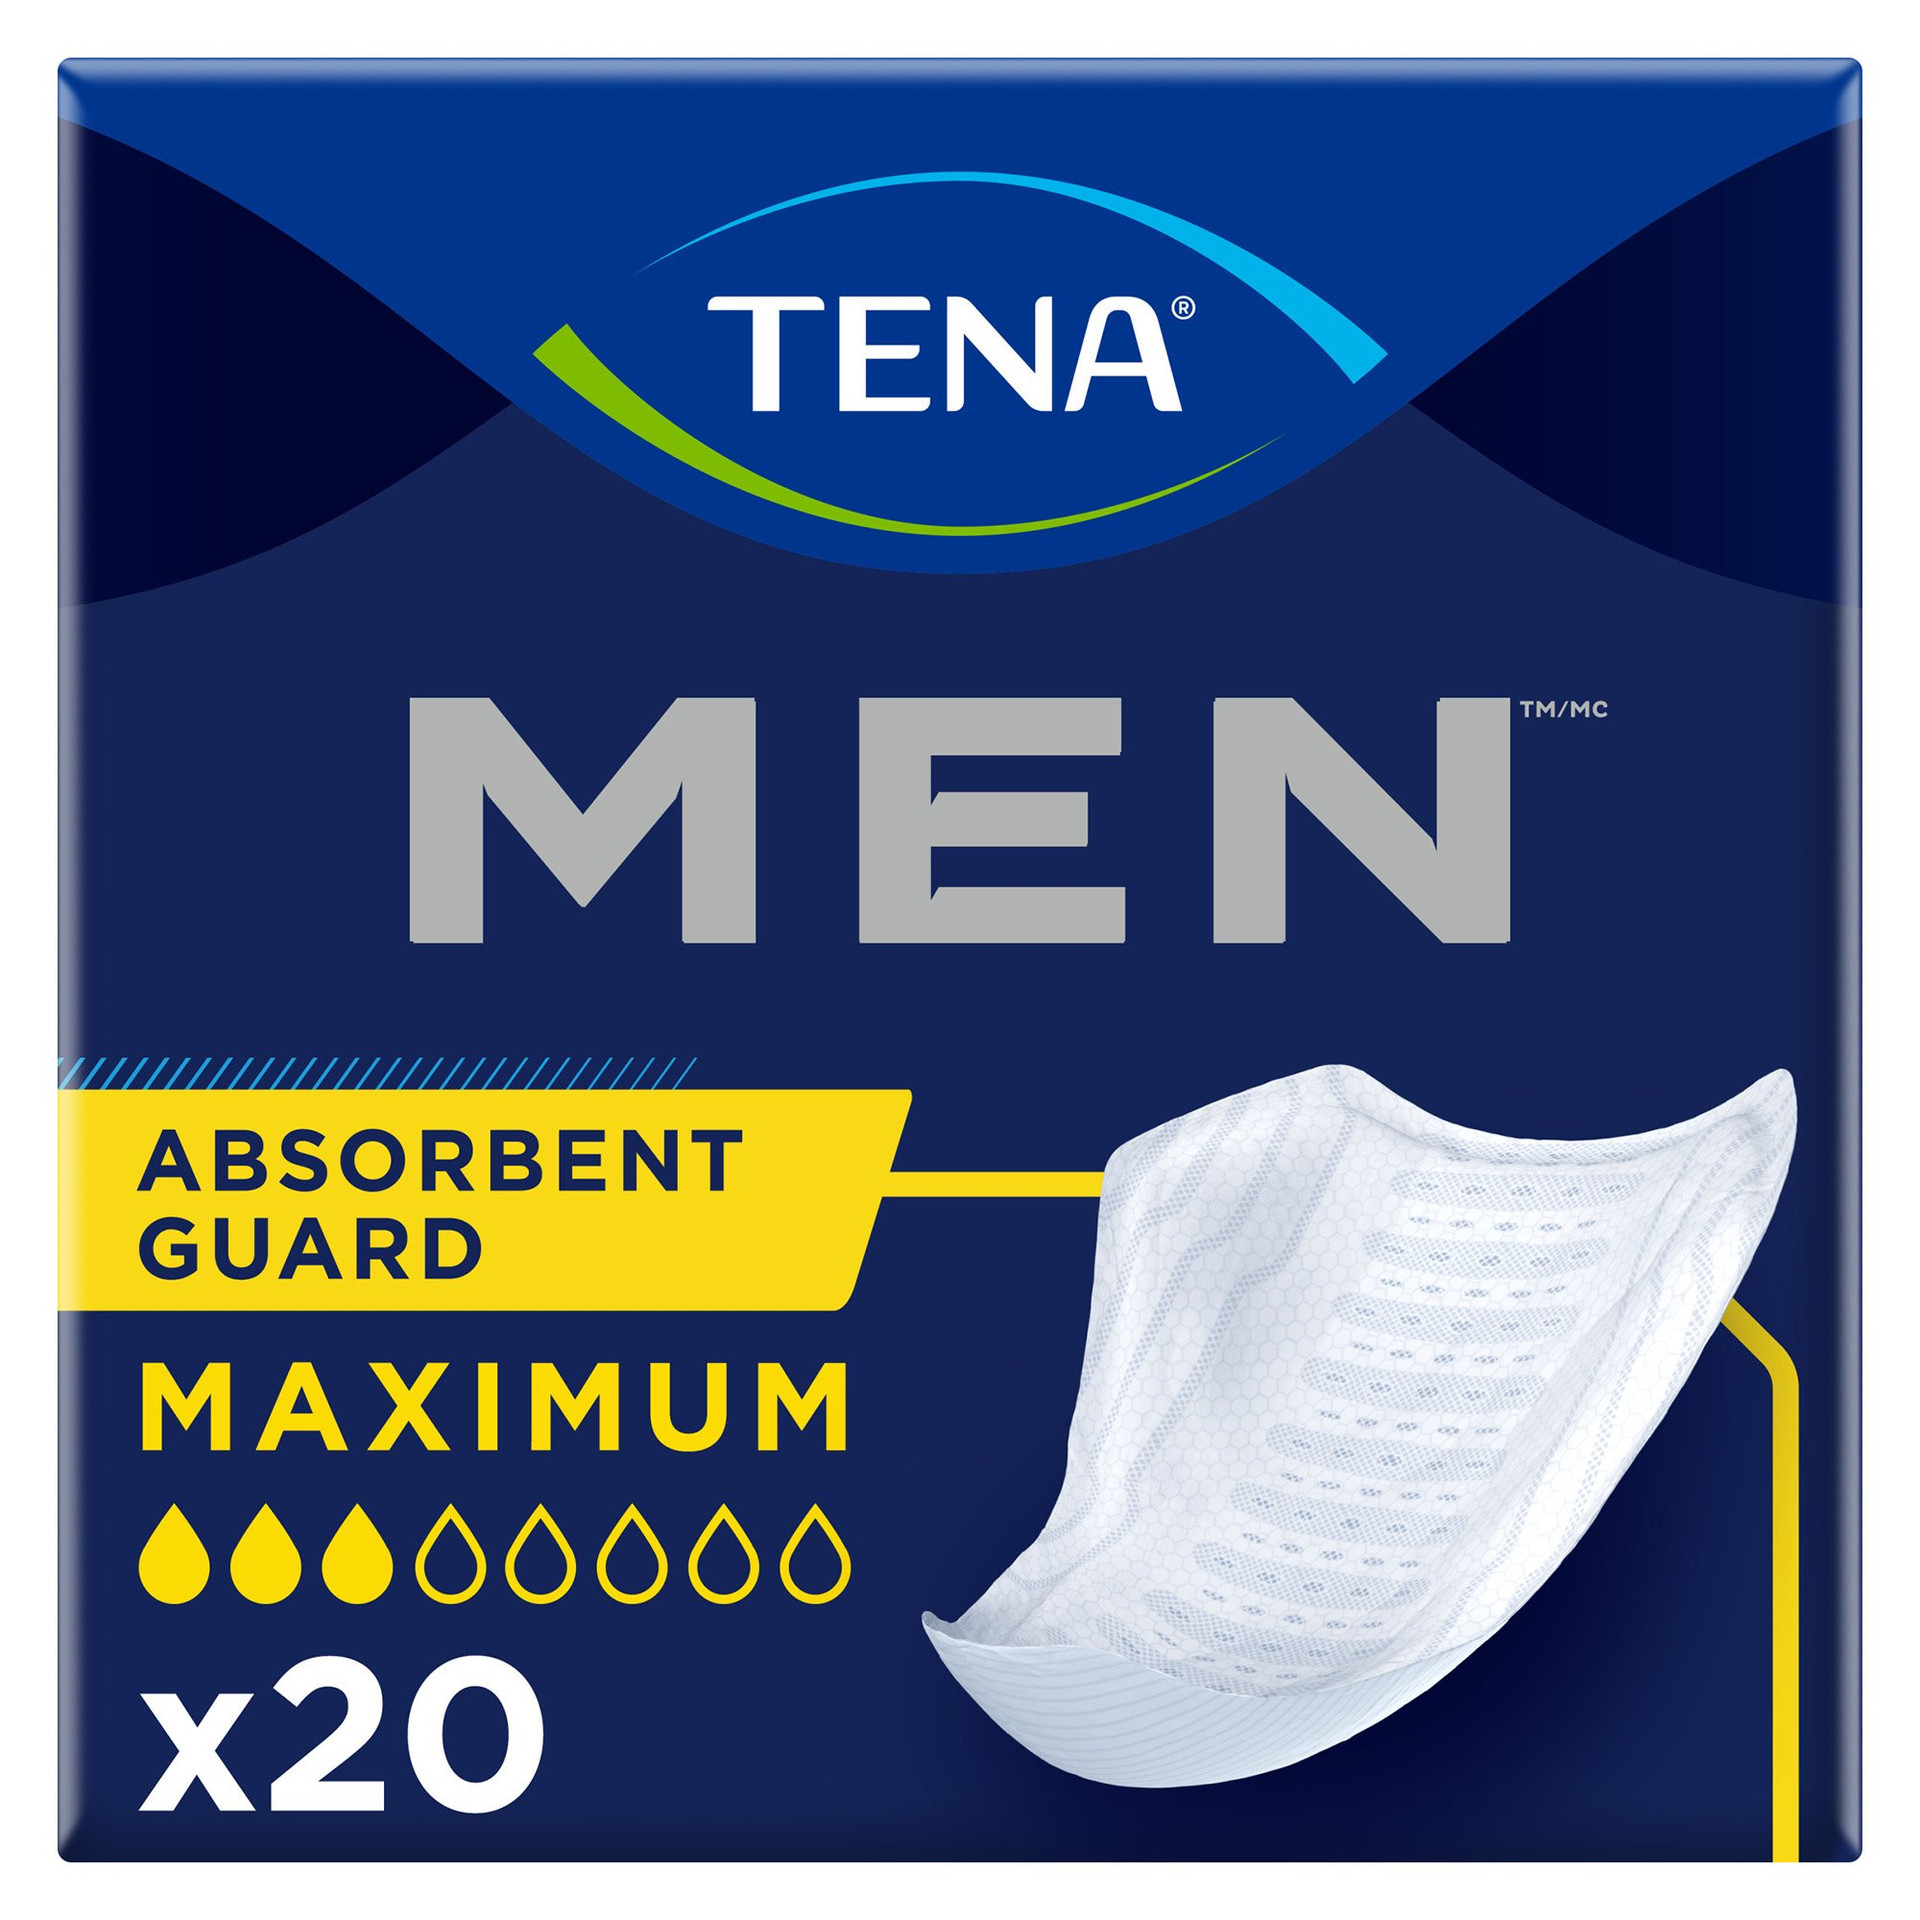 TENA Men Absorbent Guards, Moderate Bladder Leakage Protection for ...